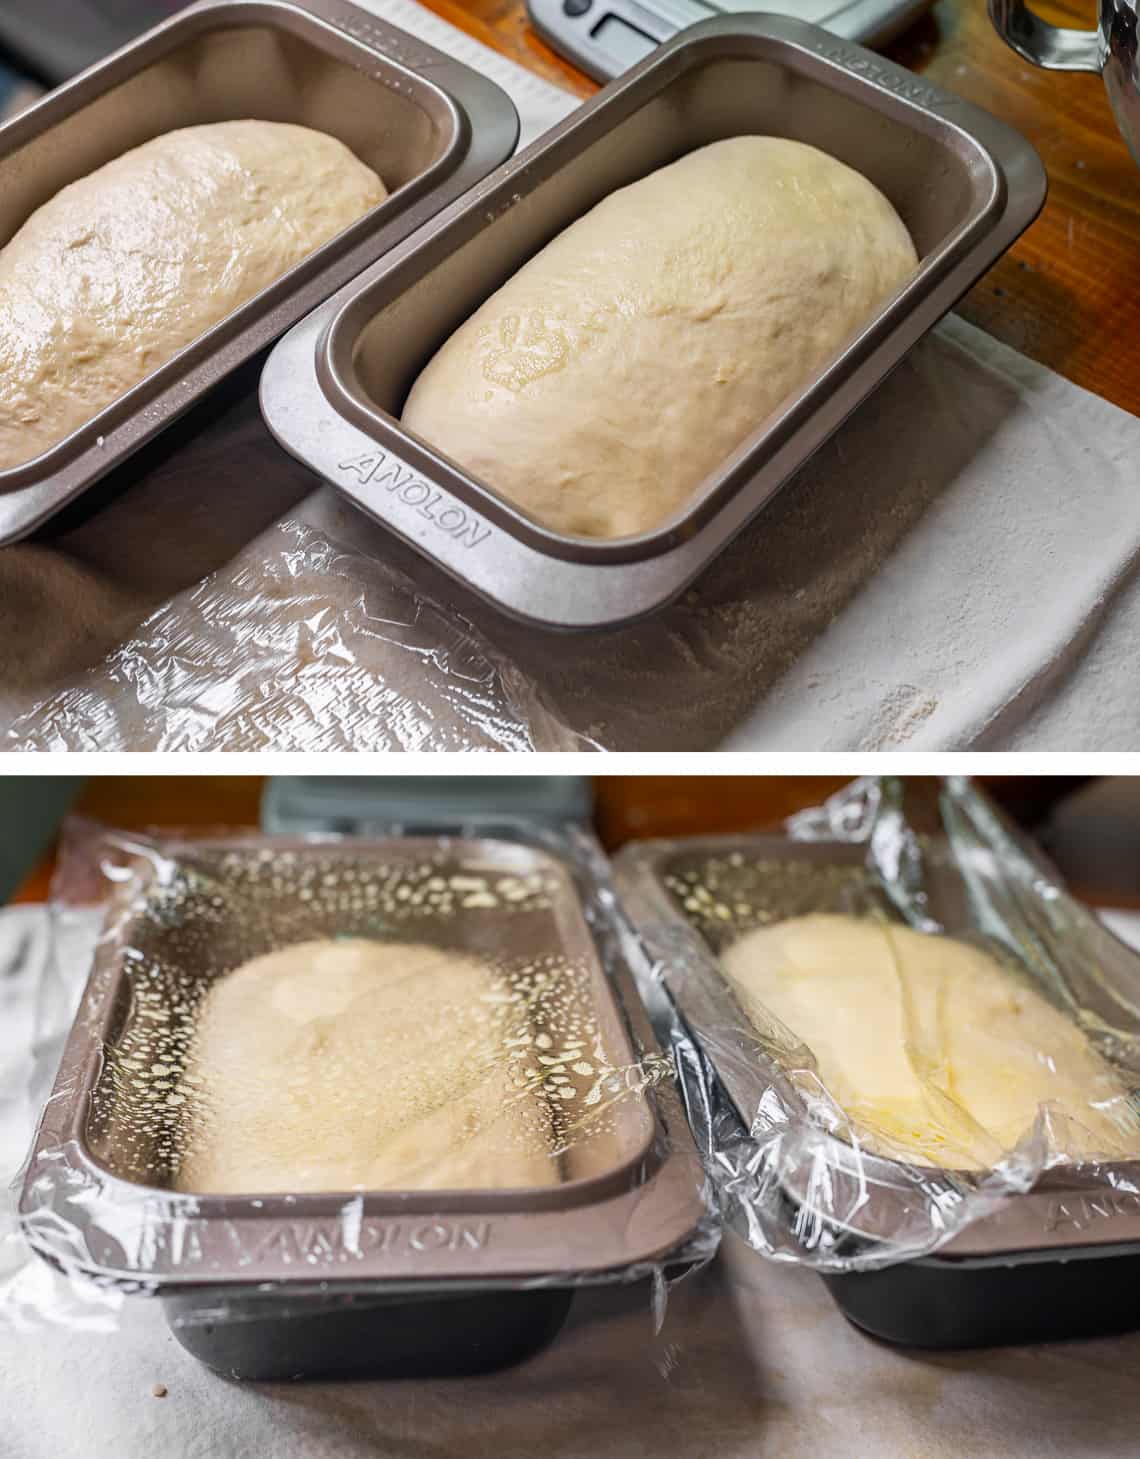 top two shaped ;paves place in greased pans, bottom loaves topped with nonstick spray lined plastic wrap.